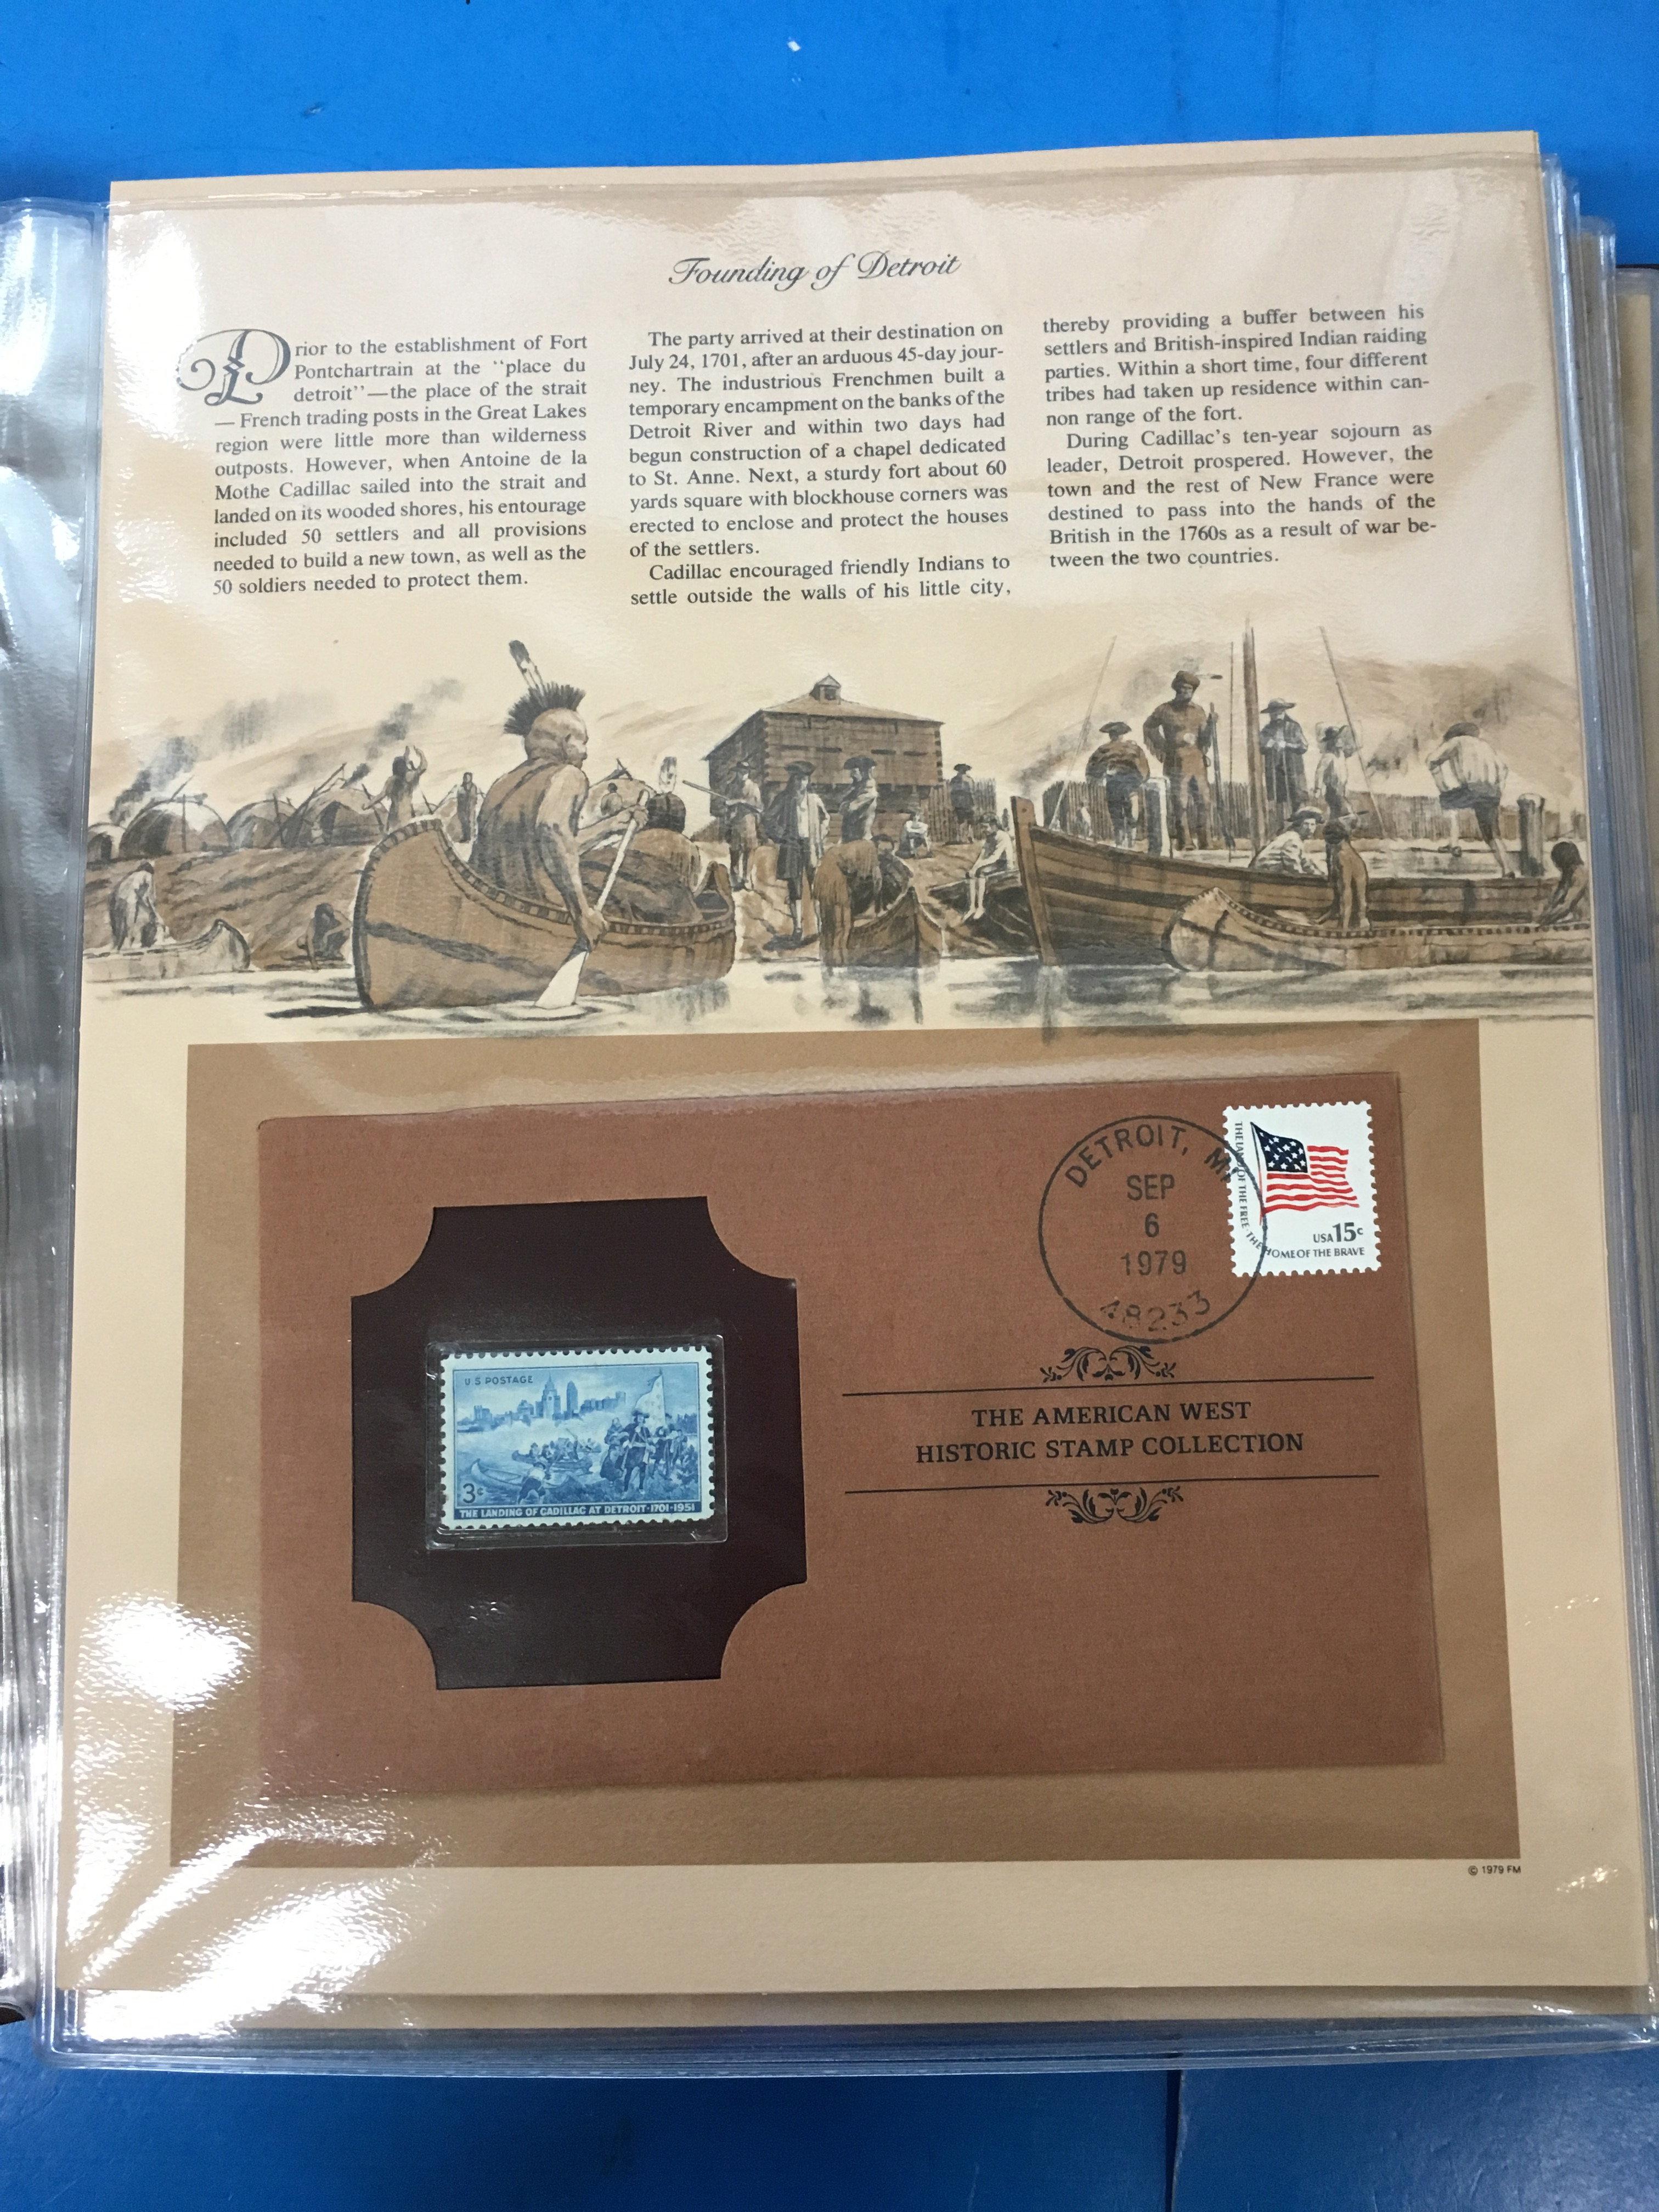 The American West Historic Stamp Collection - Founding of Detroit